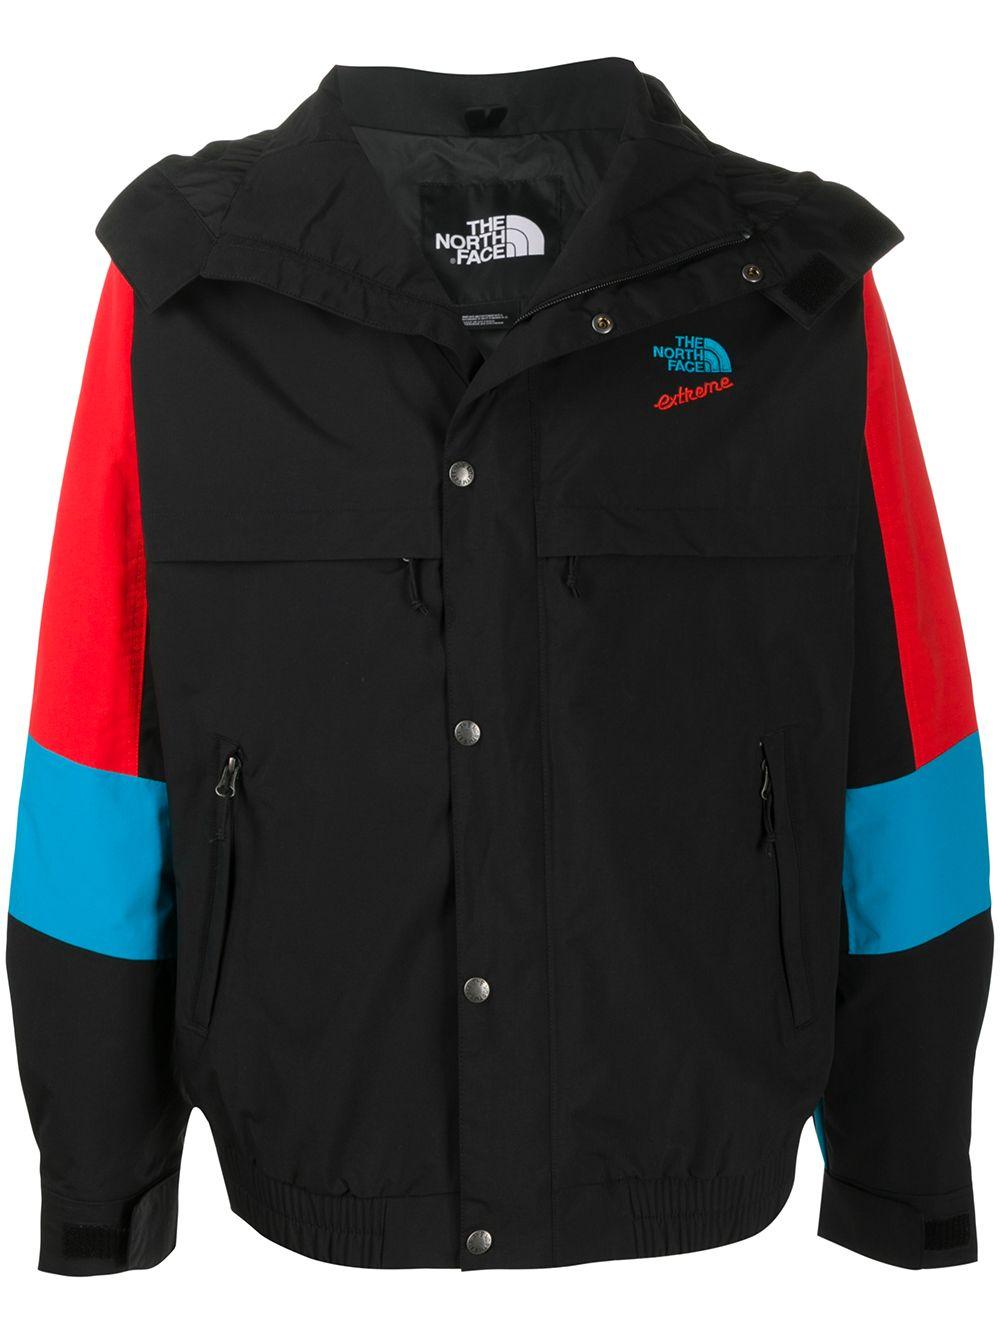 The North Face Synthetic 92 Extreme Rain Jacket in Black/Red 